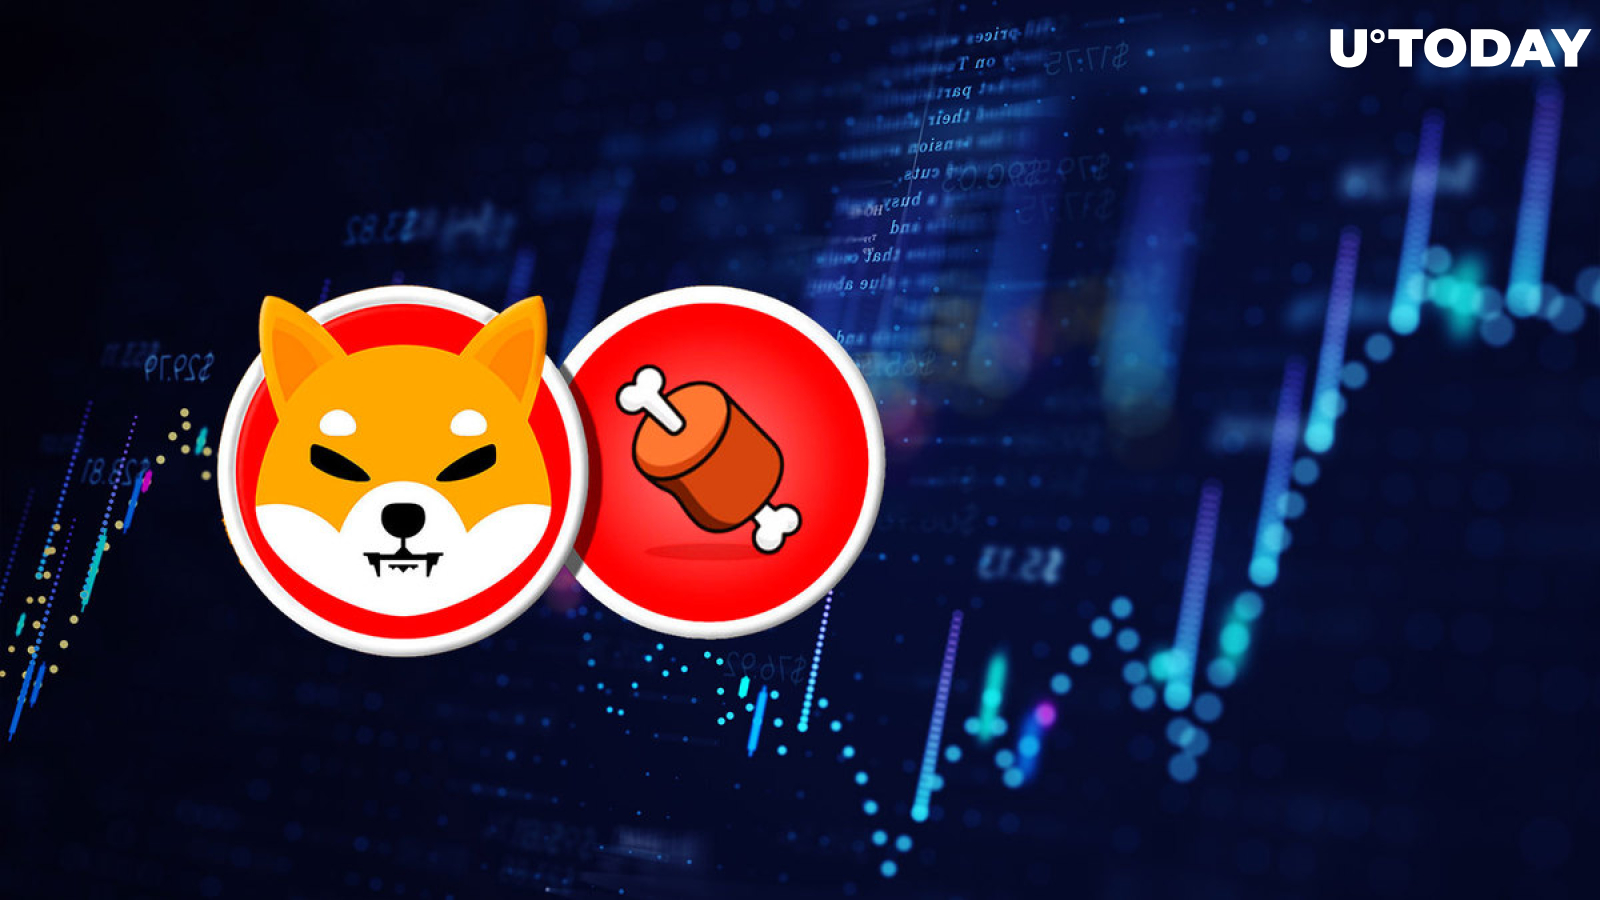 Shiba Inu's BONE up 10% as Price Gains Ground Against BTC and ETH, Here's Why